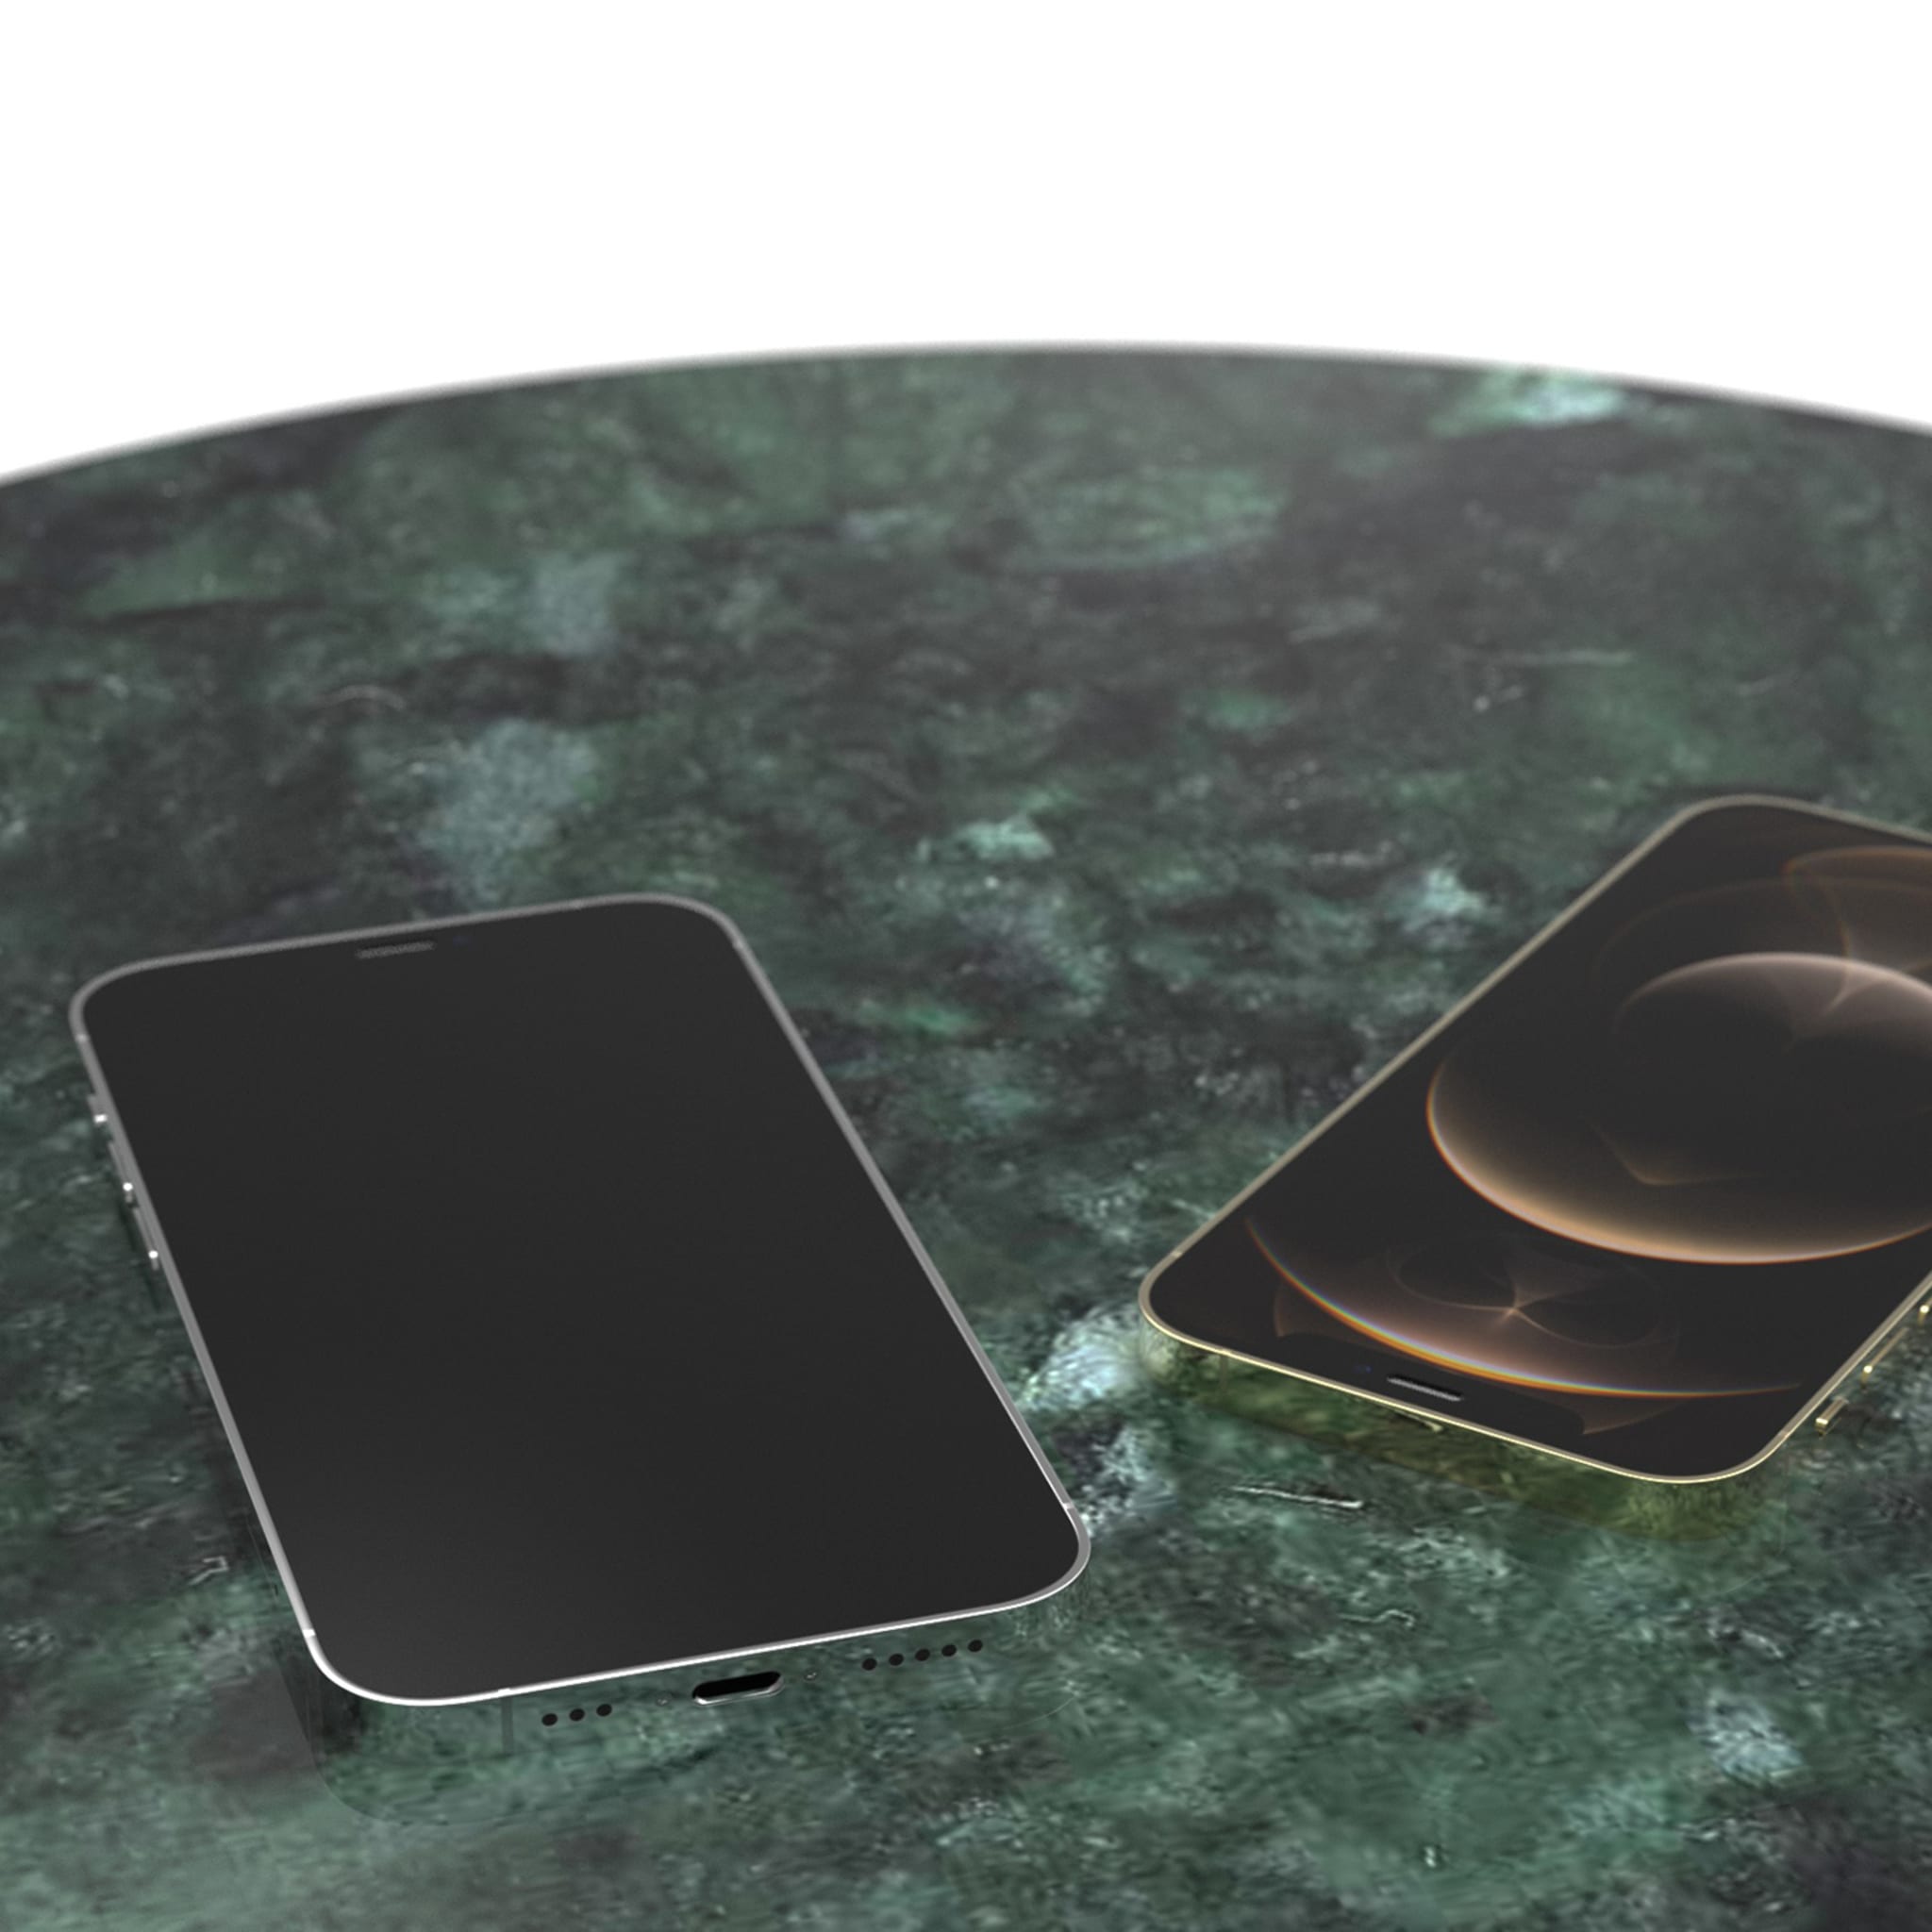 21st Century Guatemala Marble Coffee Table with Wireless Charger - Alternative view 2